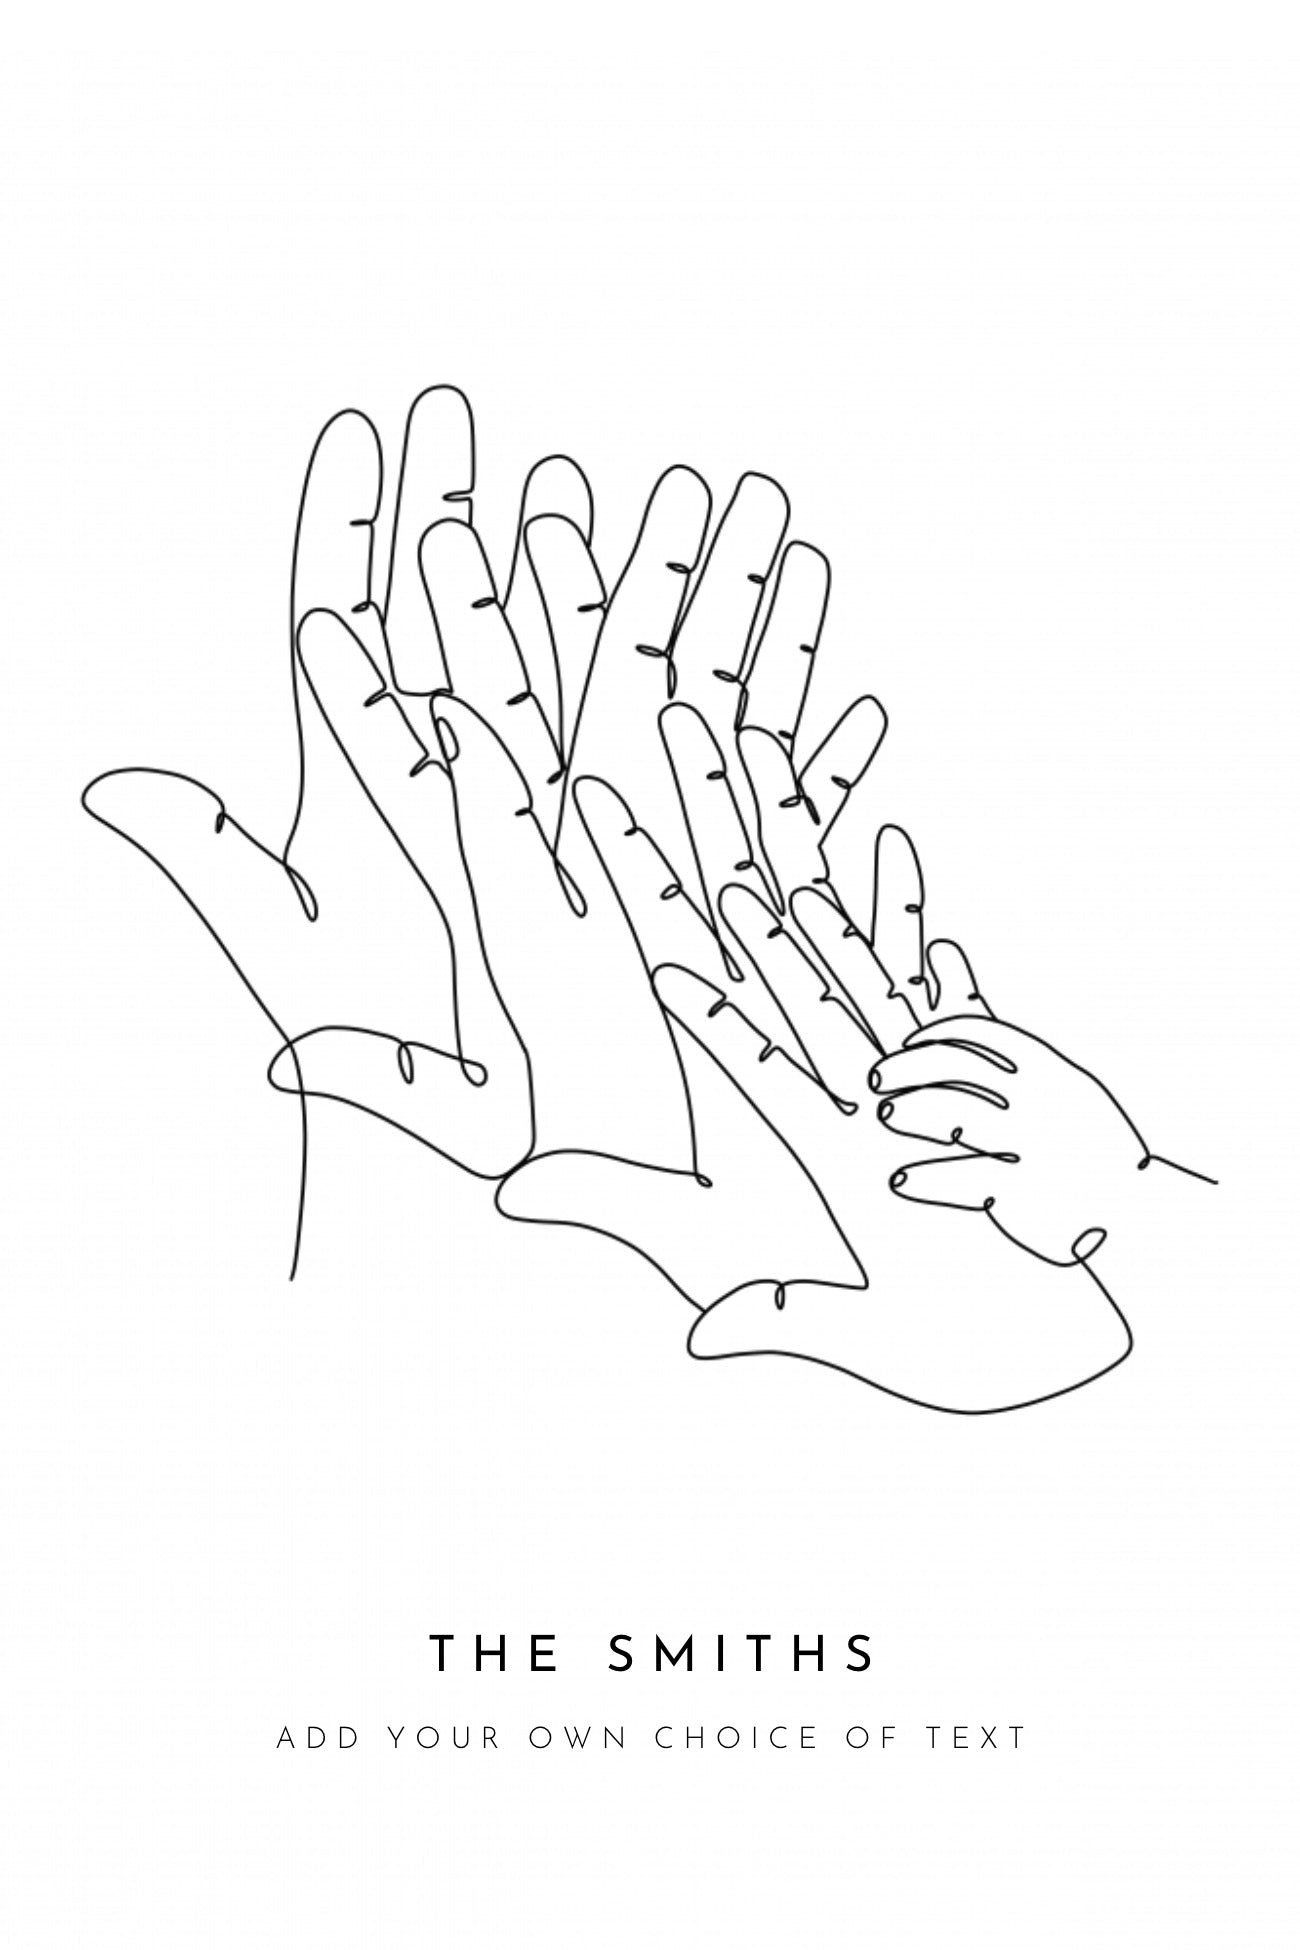 Six Connected Line Hands Print